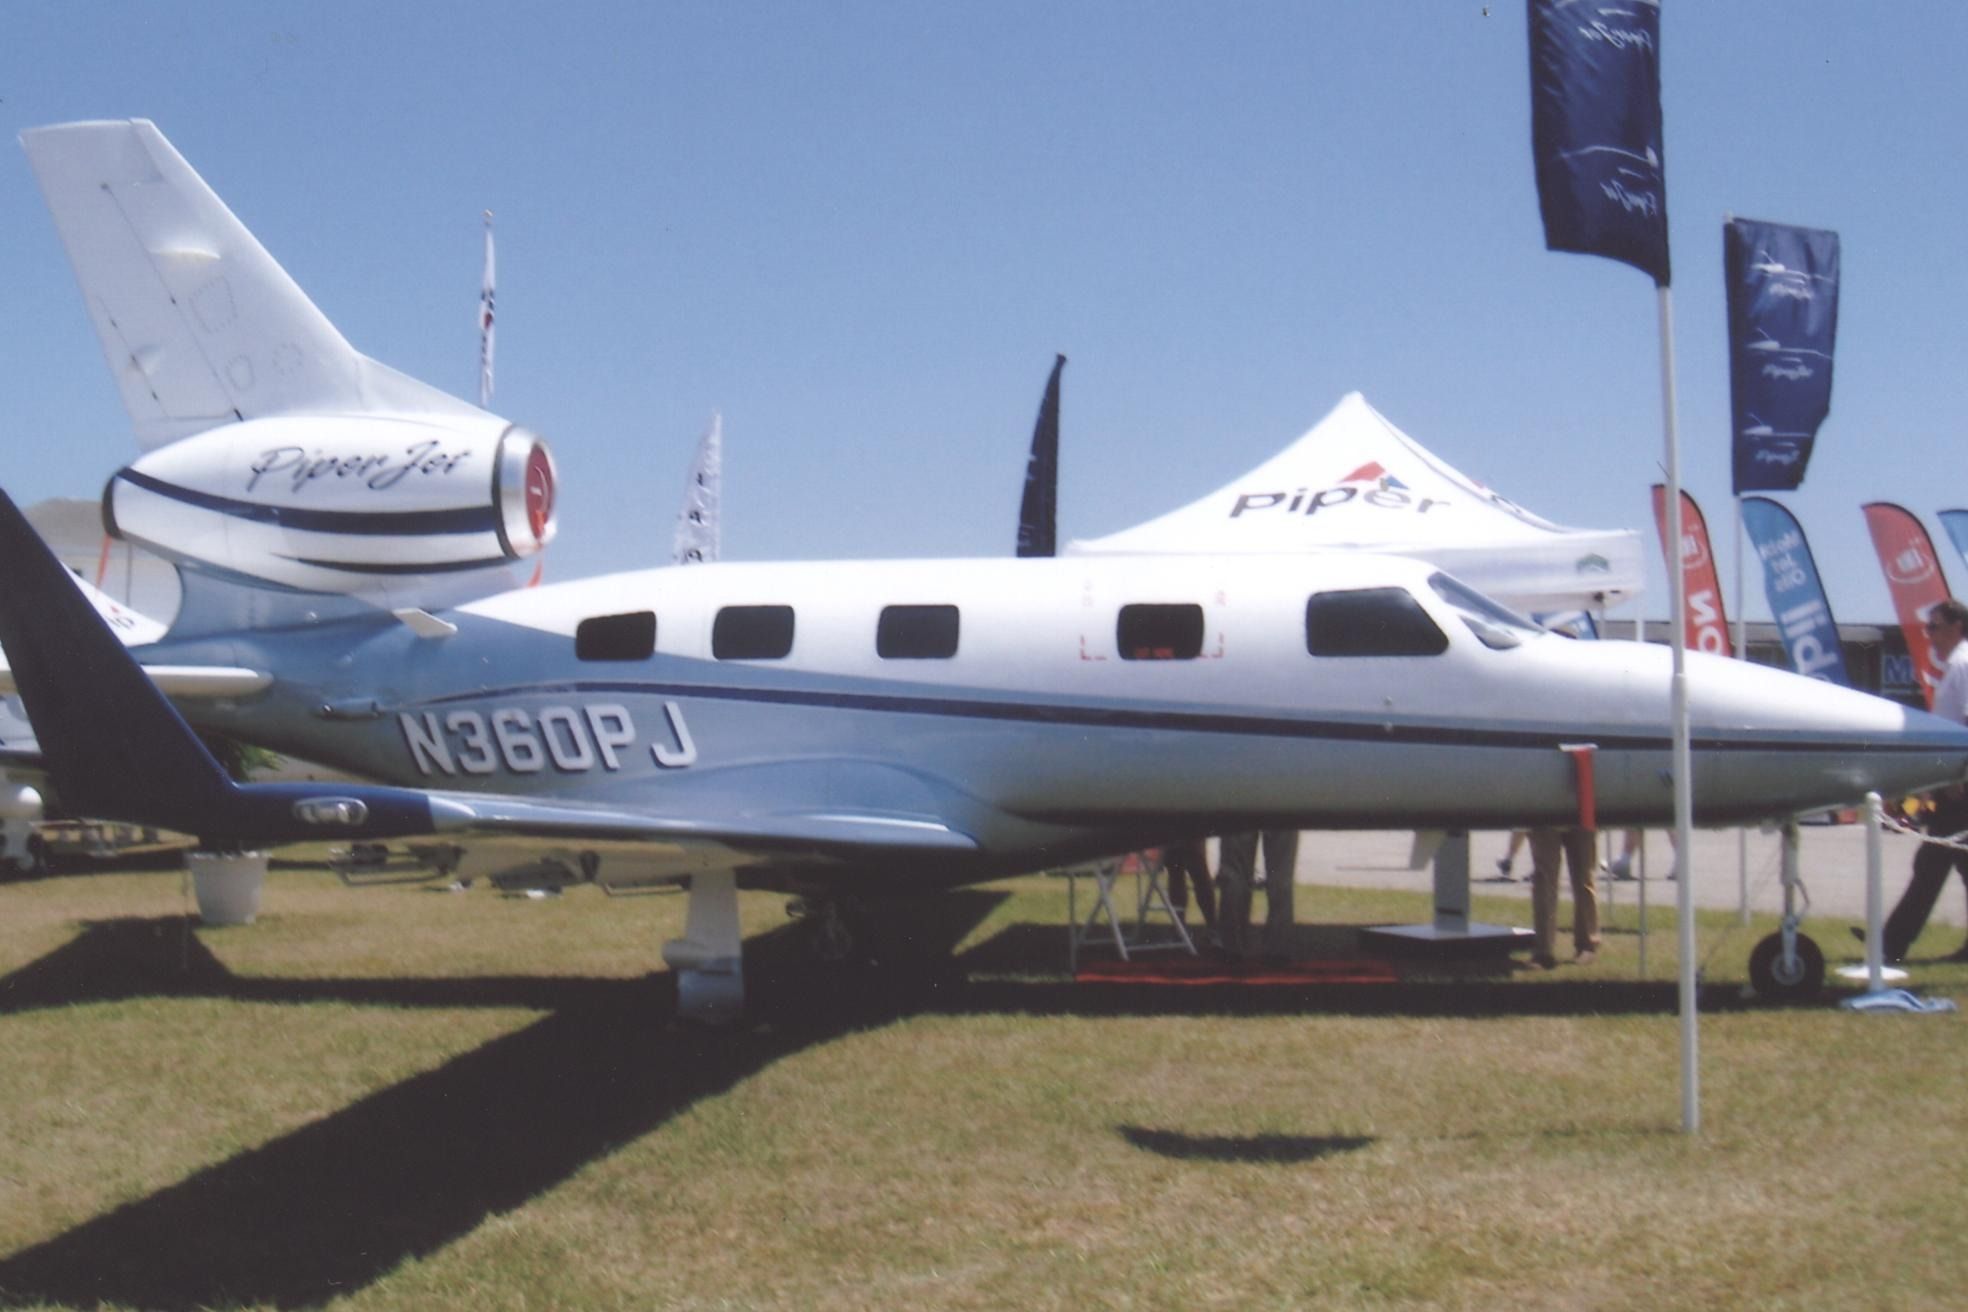 A Piper PA-47 on display at an airshow.